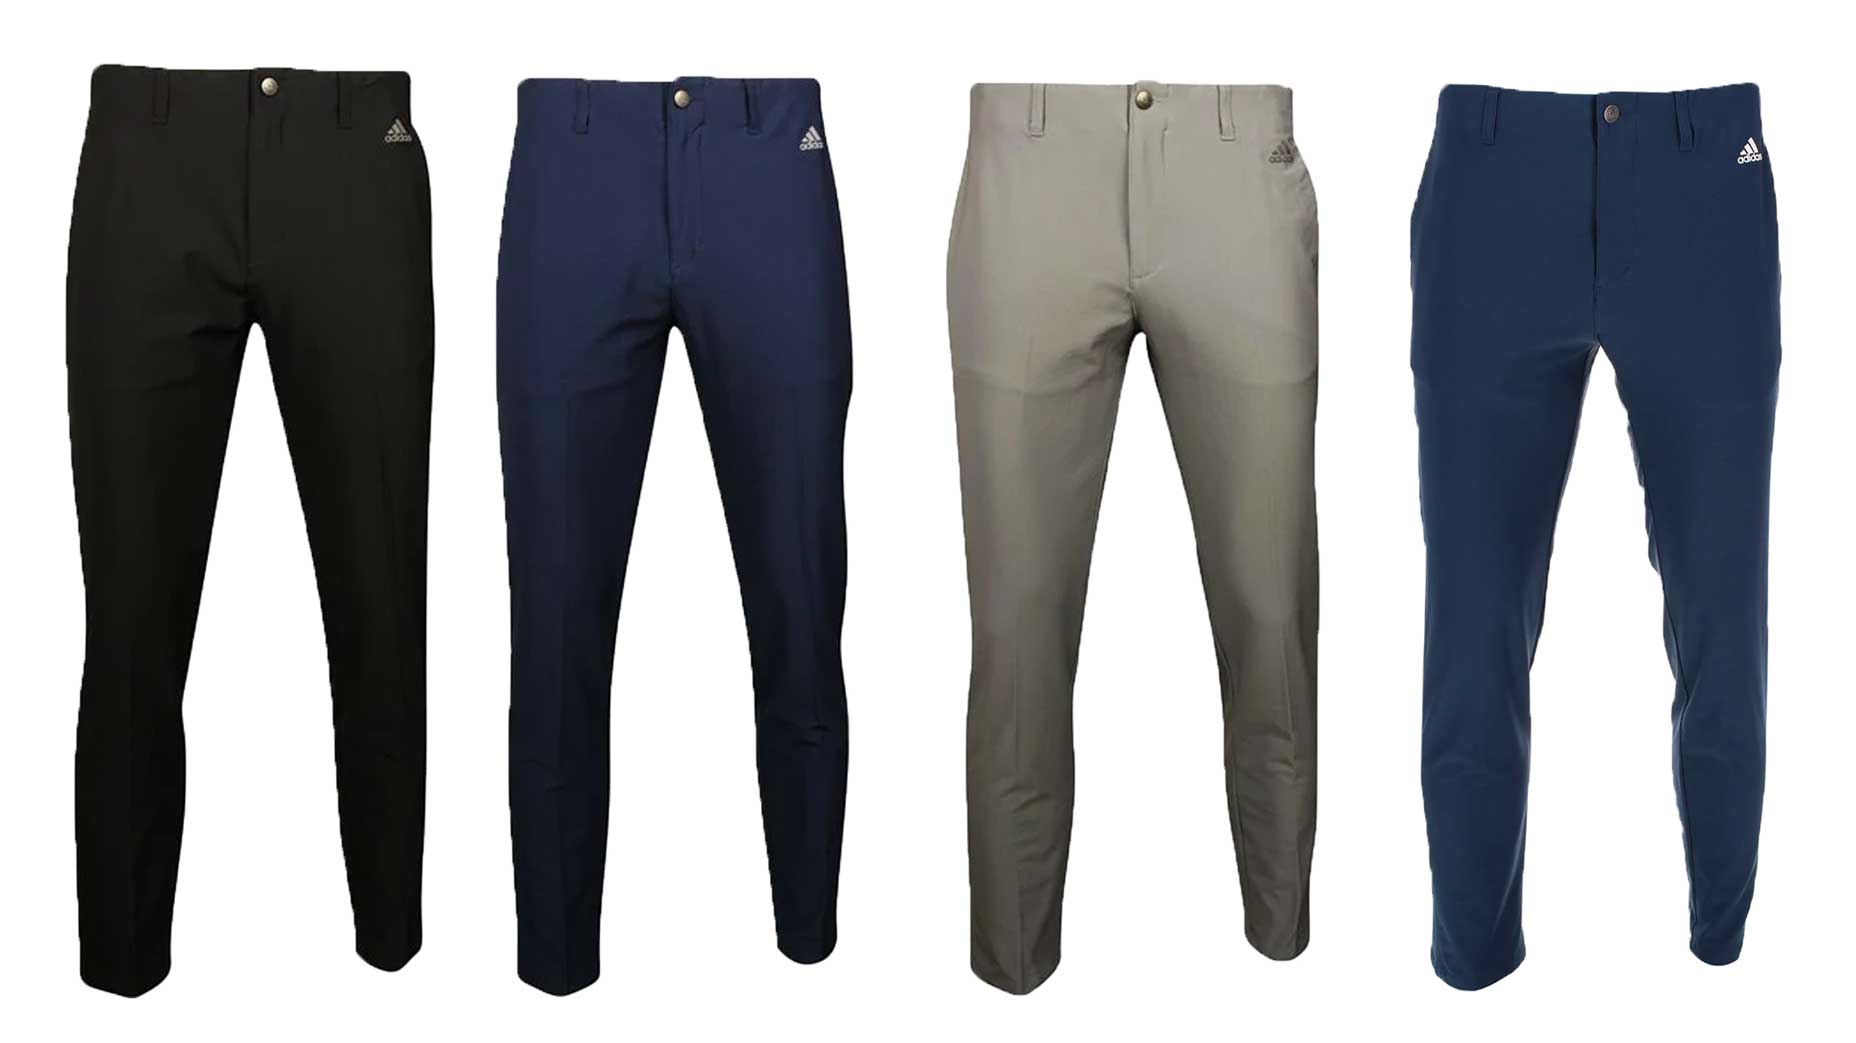 Your favorite golf pant, but tapered for a slim, modern look